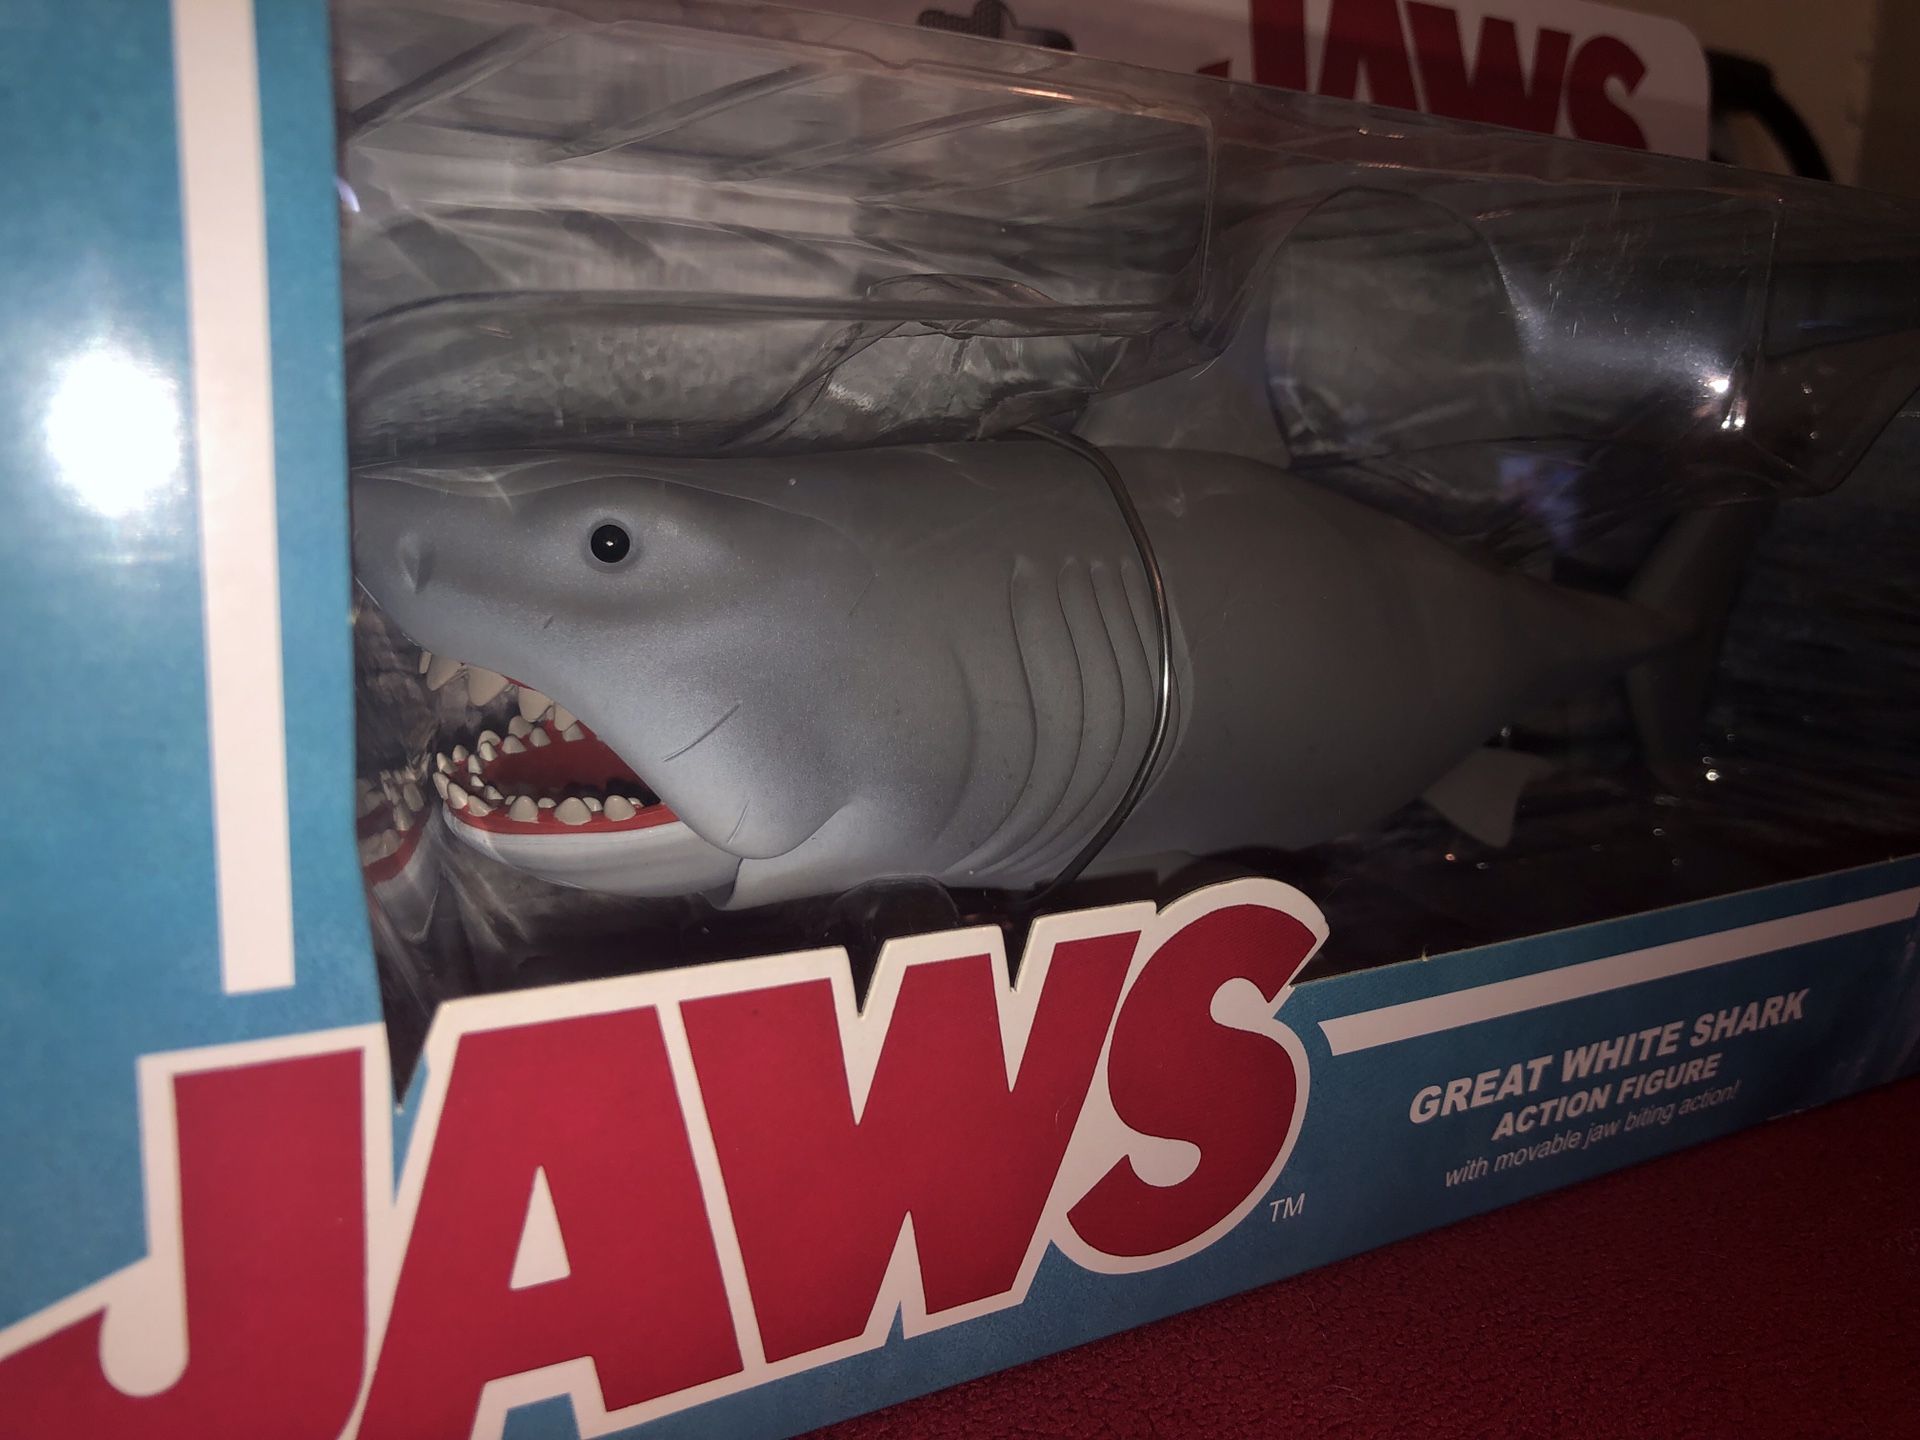 Funko Reaction Jaws Great White Shark Action Figure (IN GREAT SHAPE)